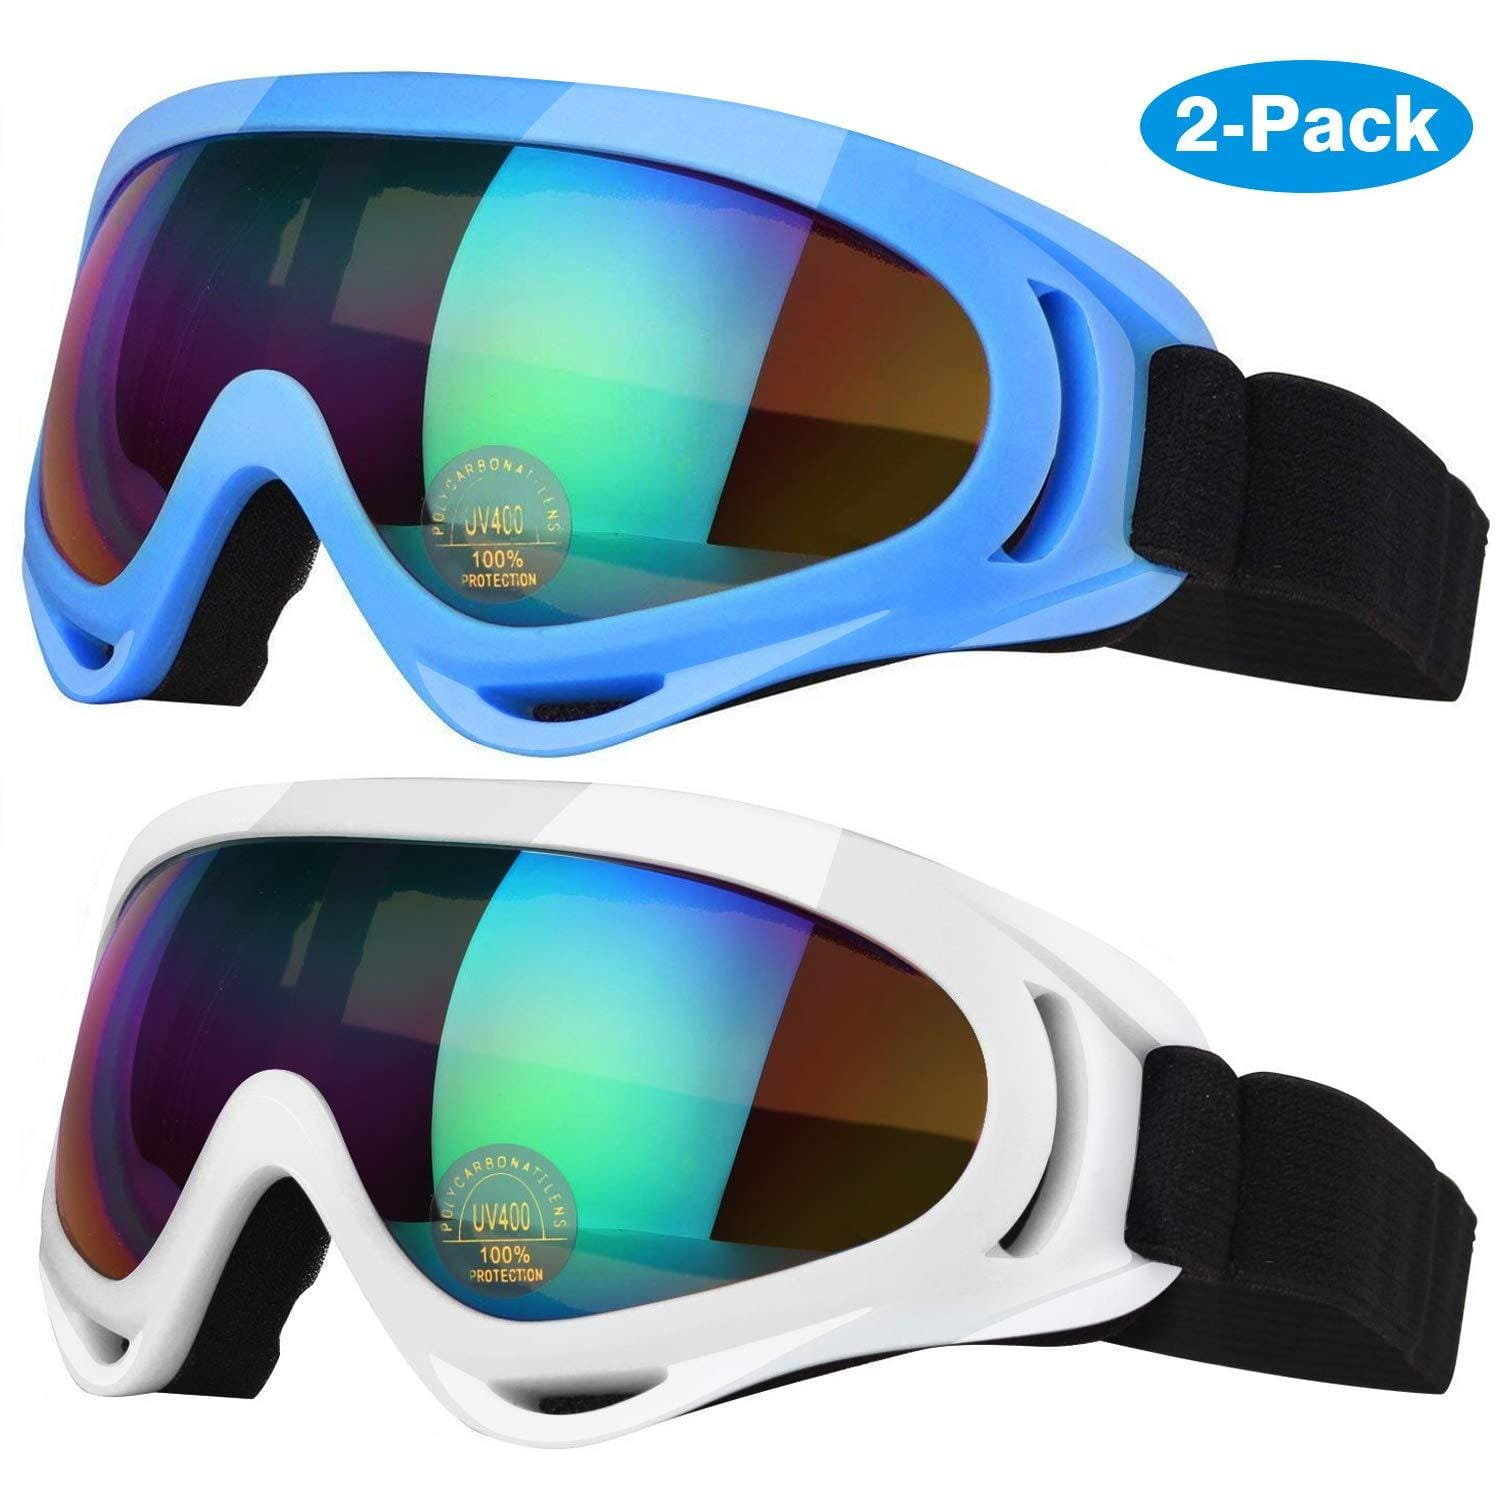 Elimoons Ski Goggles, 2 Pack Snowboard Goggles for Men Women Kids,Anti-fog  UV Protection Snow Motorcycle Goggles Youth Adult